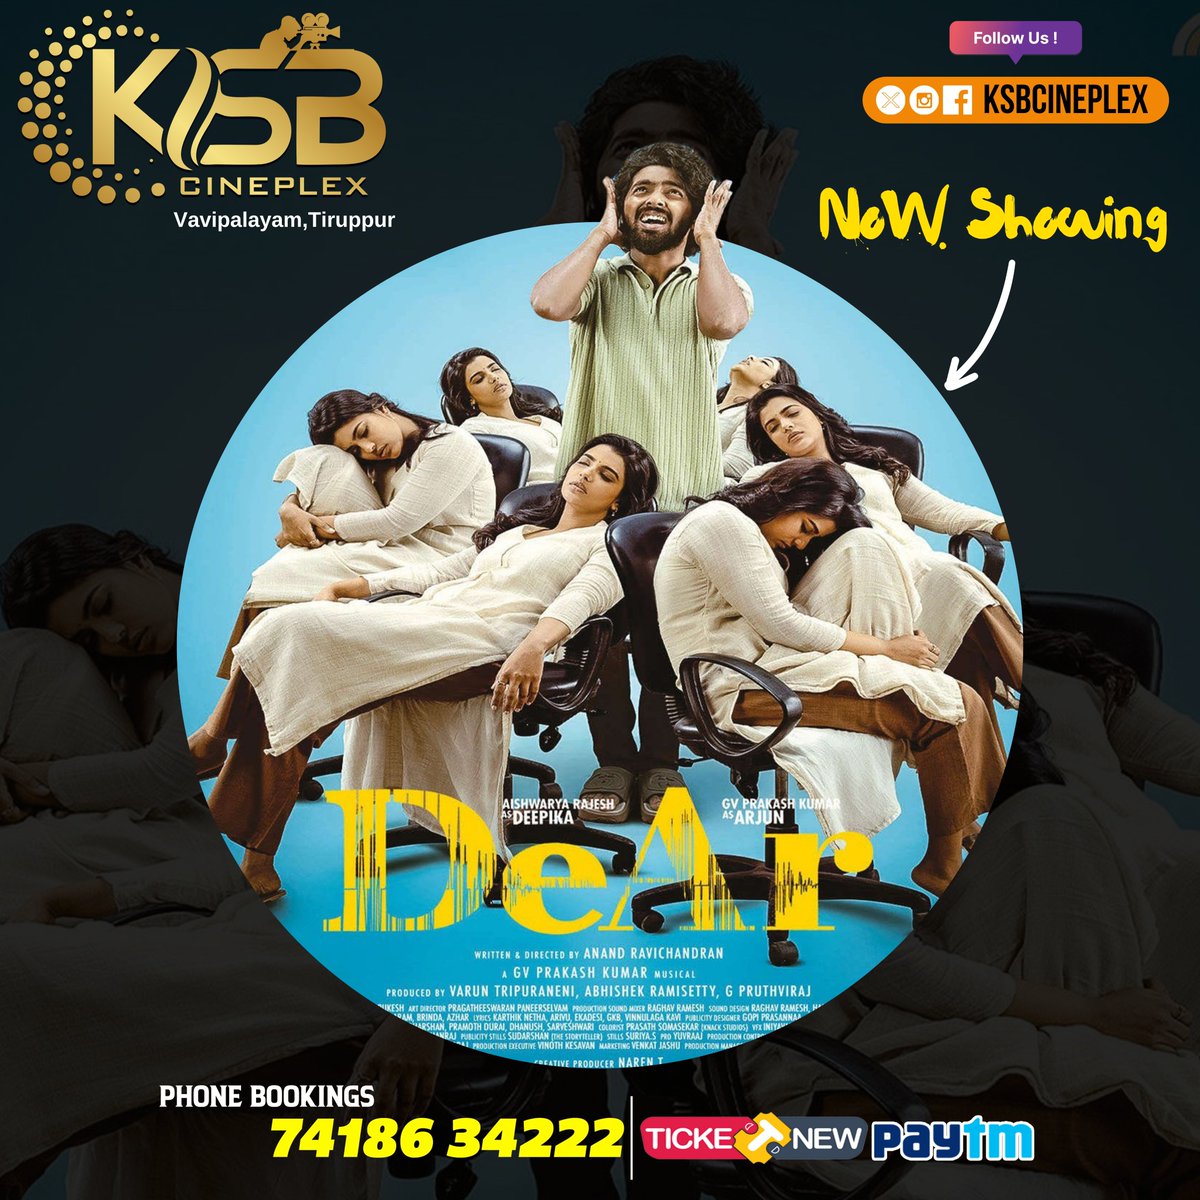 'Family oda vandhu paaka vendiya padam' - audience approves! 🥳 

Watch #DeAr with your families for this weekend!

book your tickets at 🎟️ m.paytm.me/ksbcineplex

#AbhishekRamisetty #PruthvirajGK @mynameisraahul #RomeoPictures @gvprakash @aishu_dil #KSBCineplex